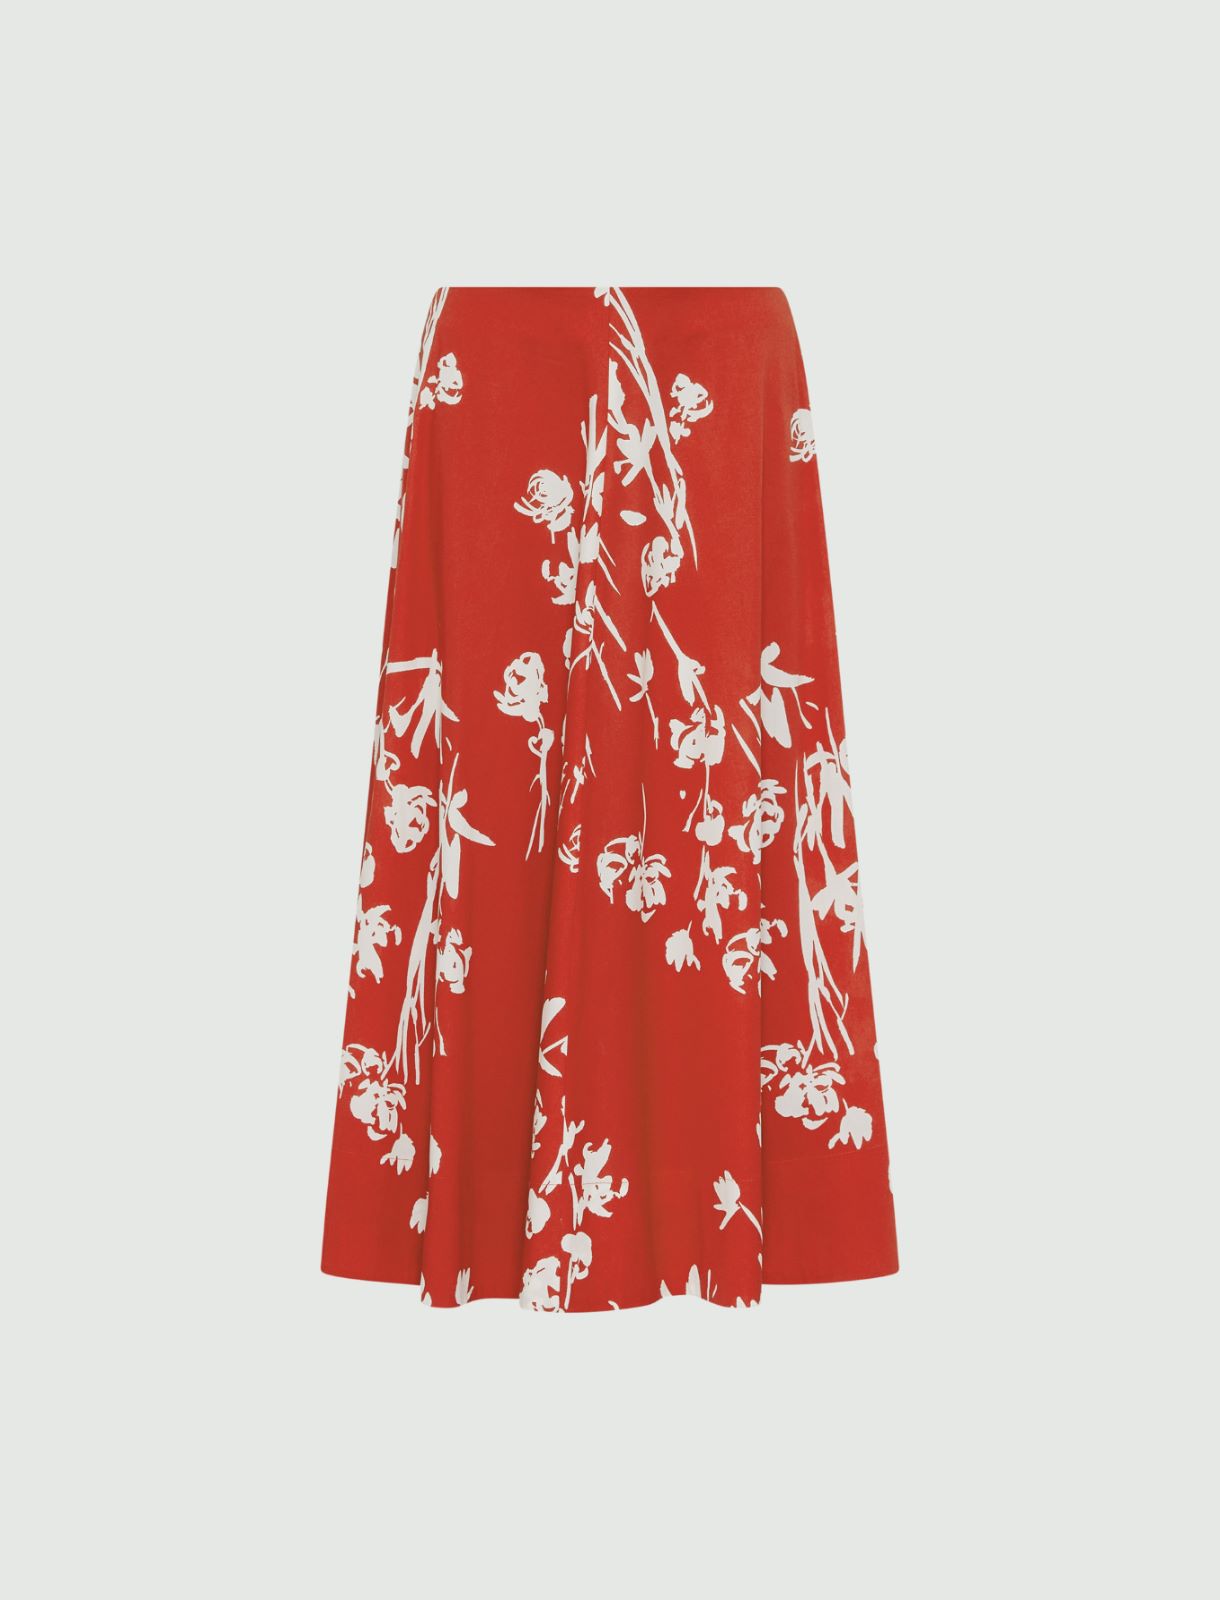 Patterned skirt, red | Marella